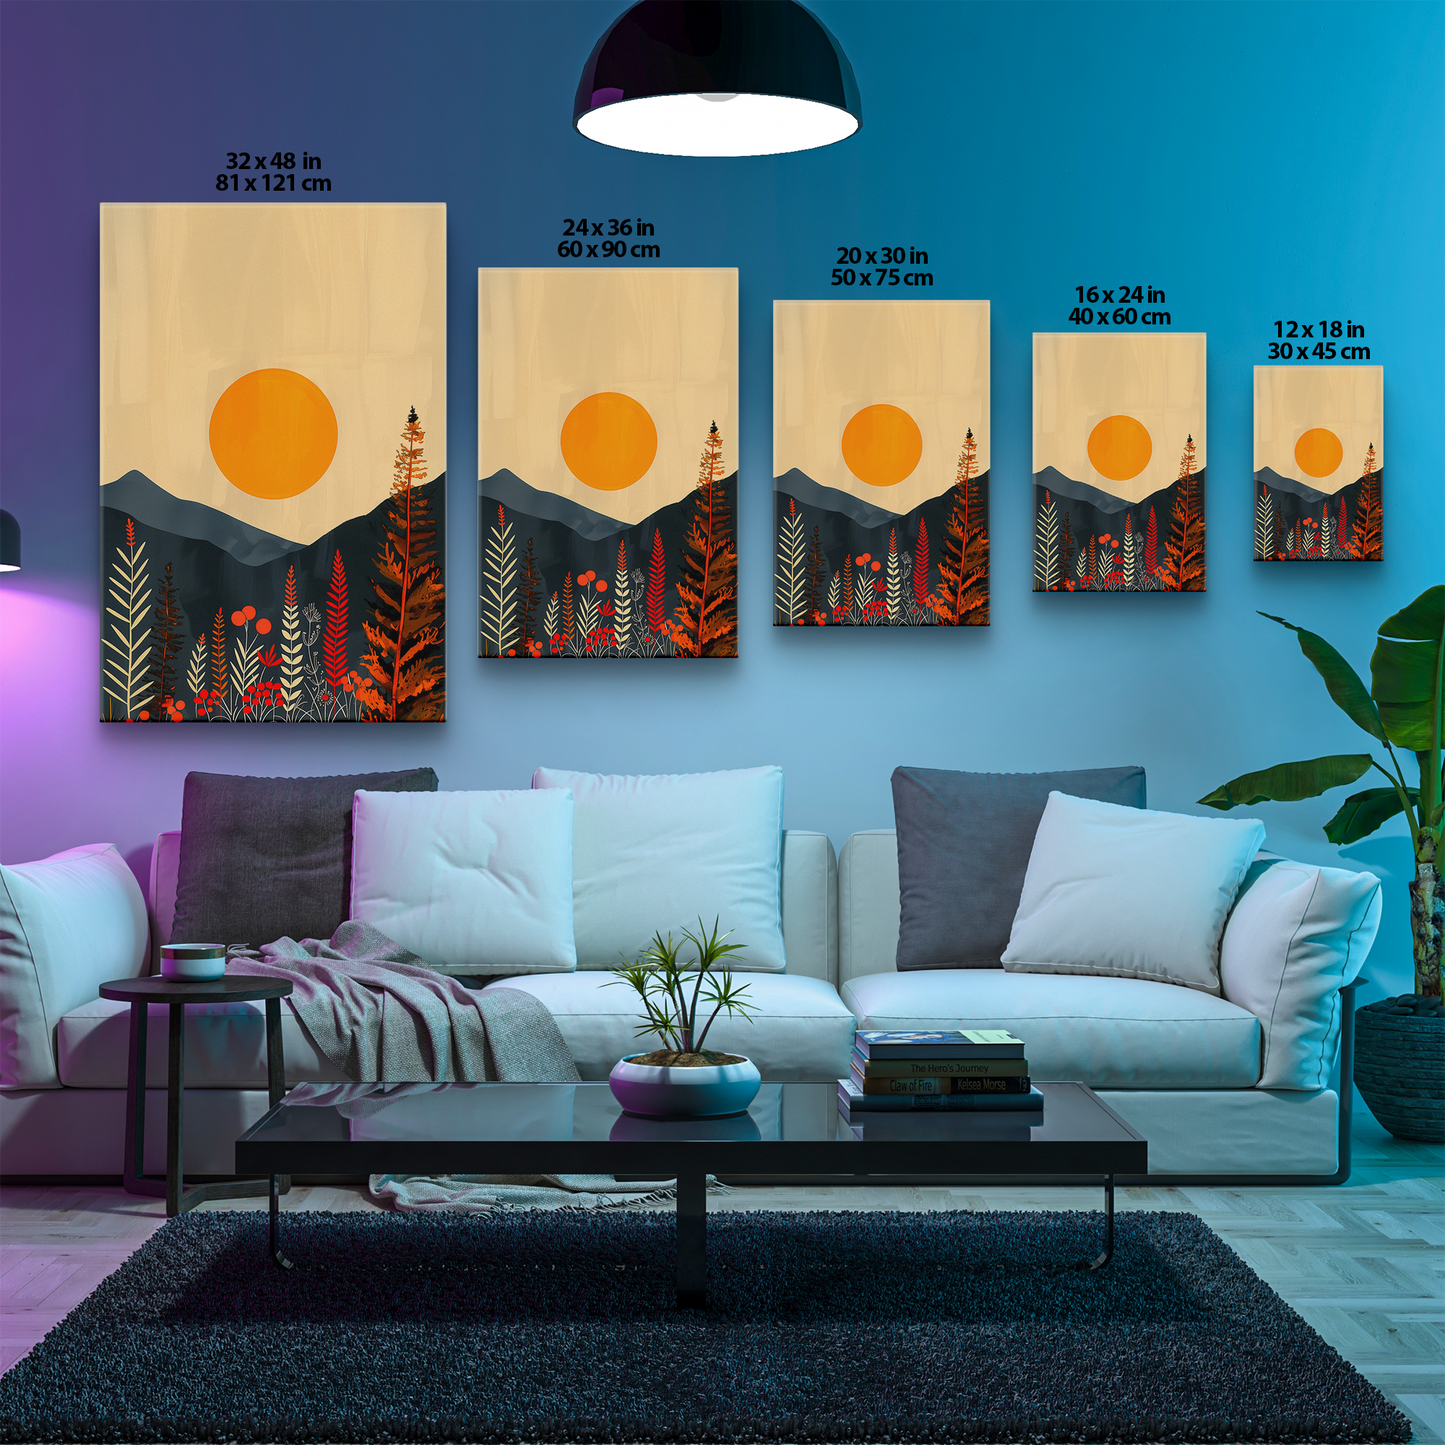 Amber Serenity (Canvas)Discover Amber Serenity at RimaGallery: a premium, eco-friendly canvas celebrating quality and sustainability. Elevate your space with vibrant, lasting art.RimaGallery